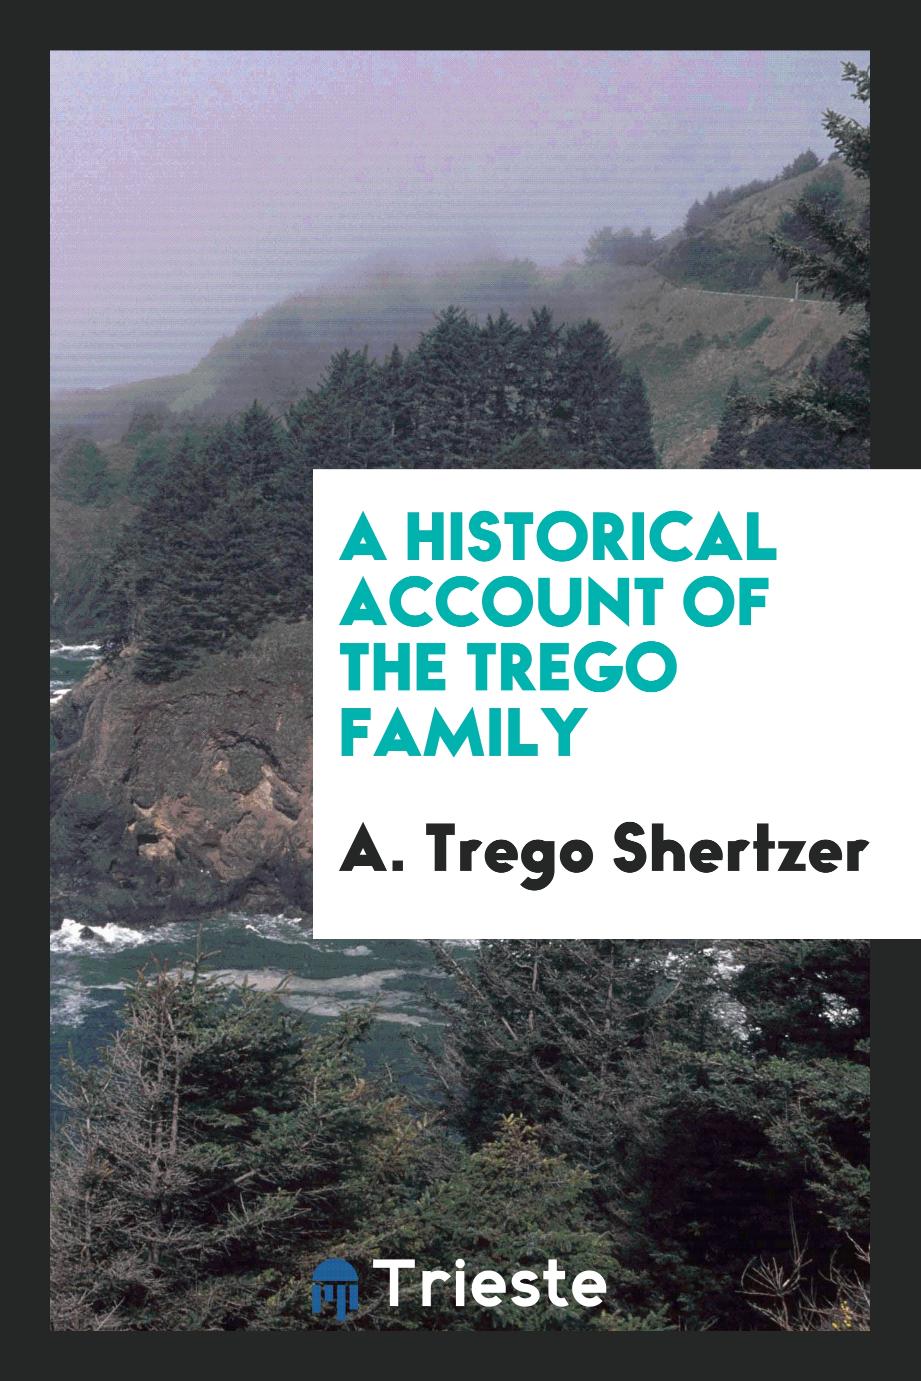 A Historical Account of the Trego Family